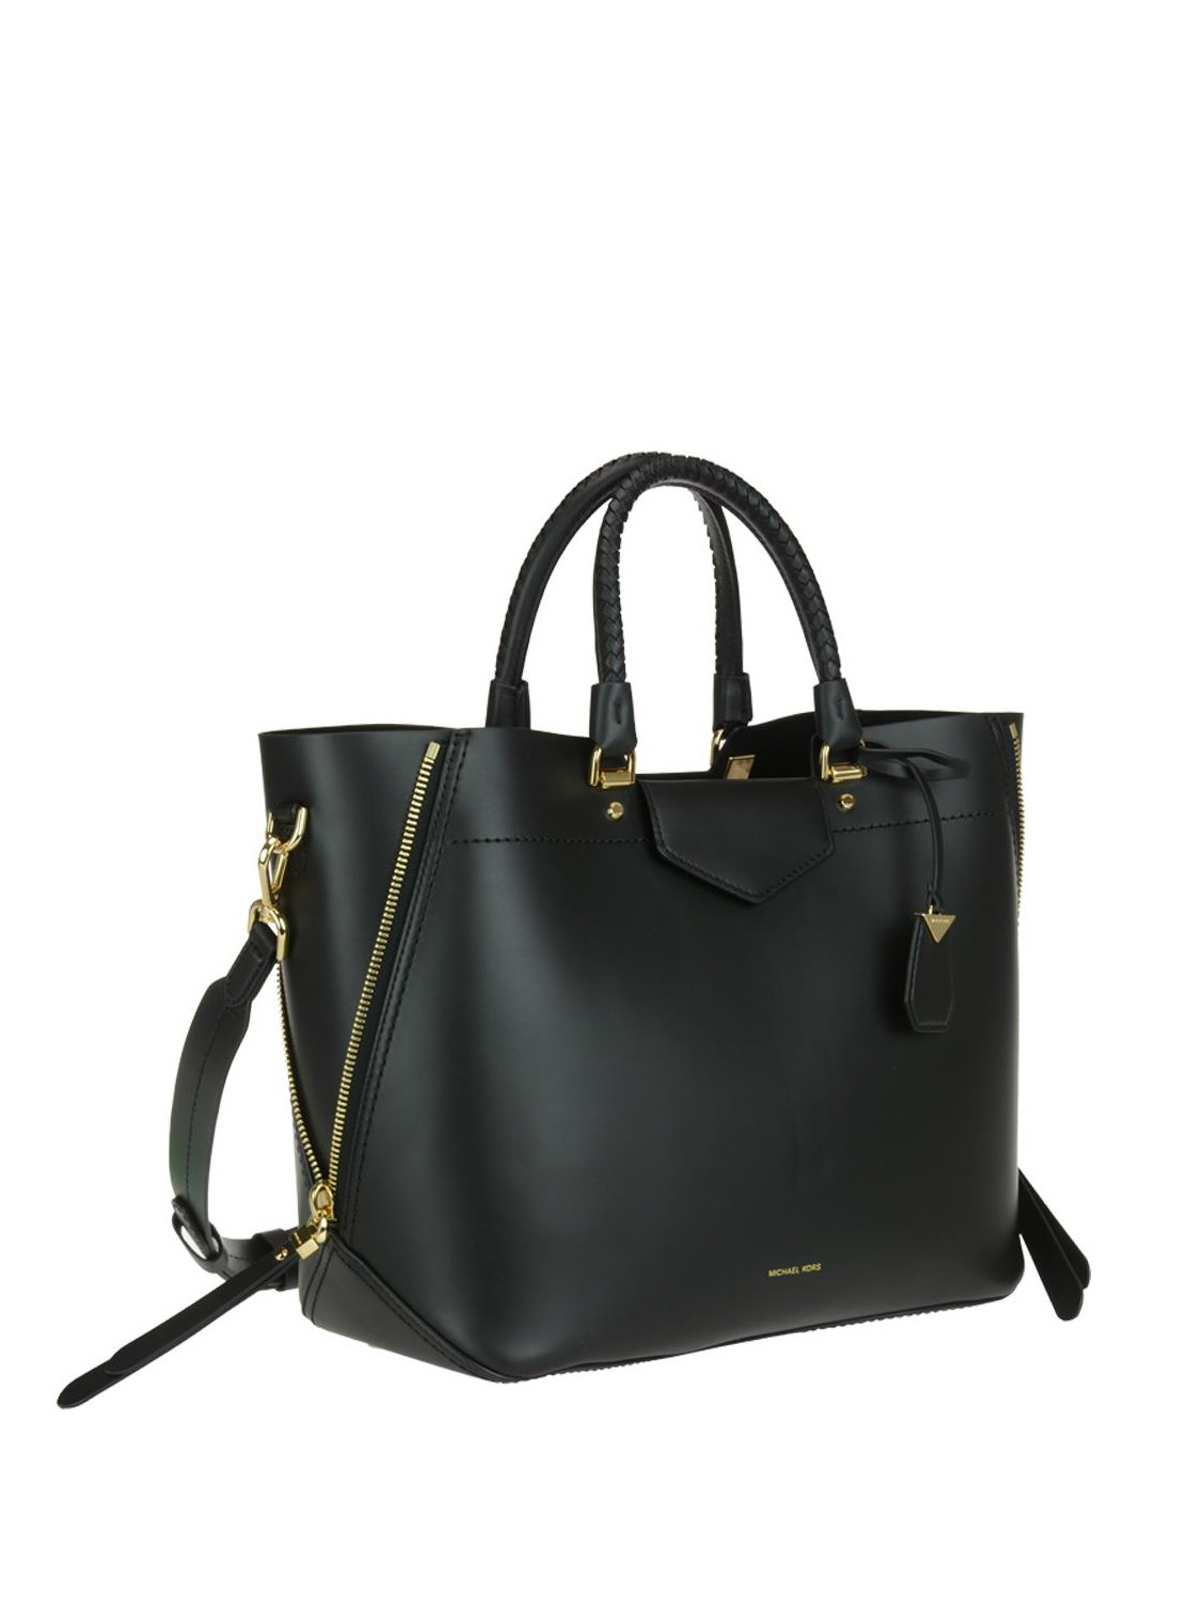 MICHAEL KORS #37348 Black Saffiano Leather Tote Bag – ALL YOUR BLISS